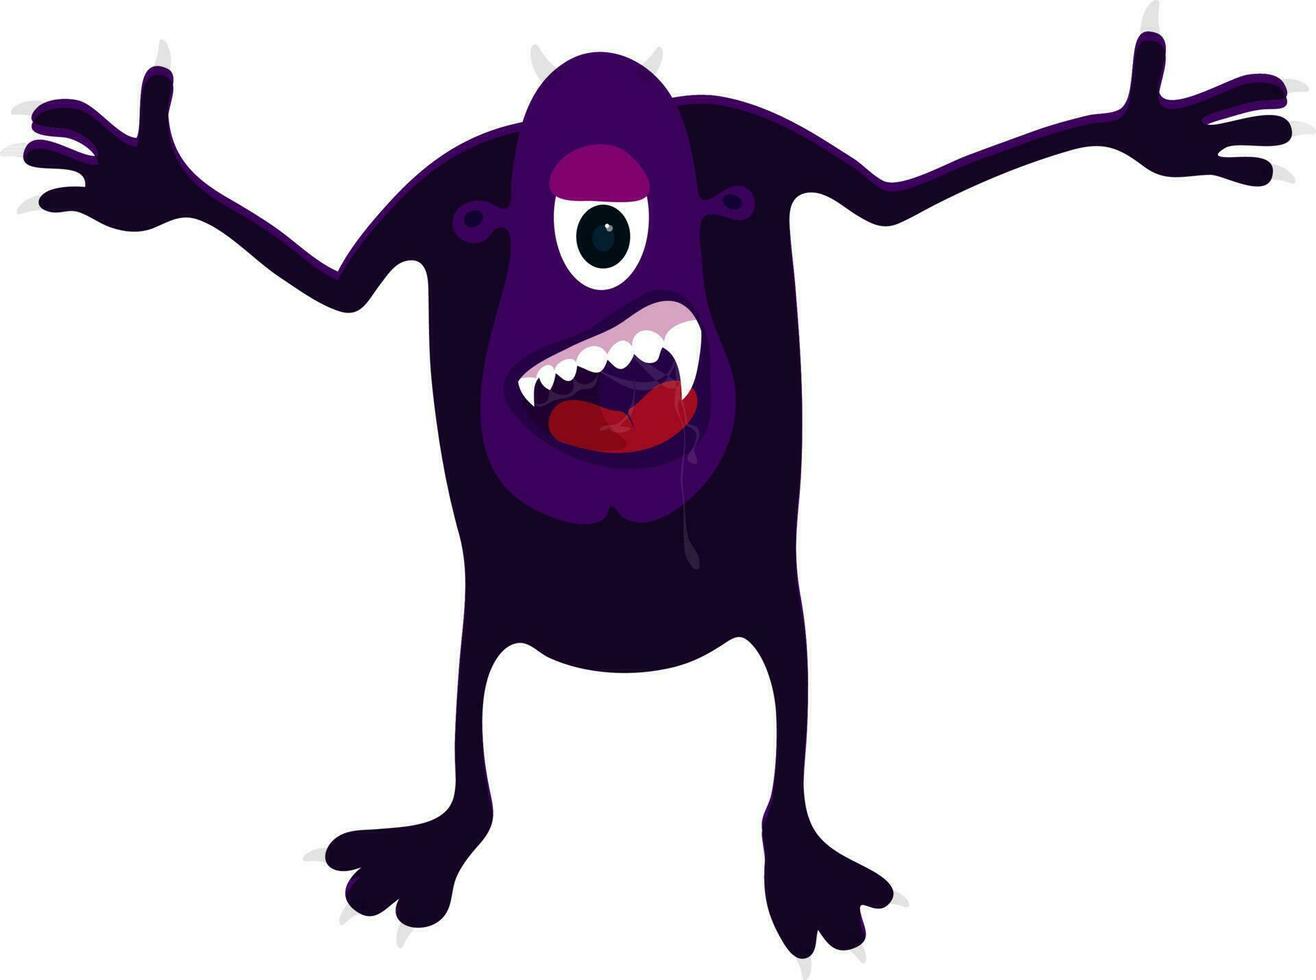 Illustration of scary zombie or monster. vector